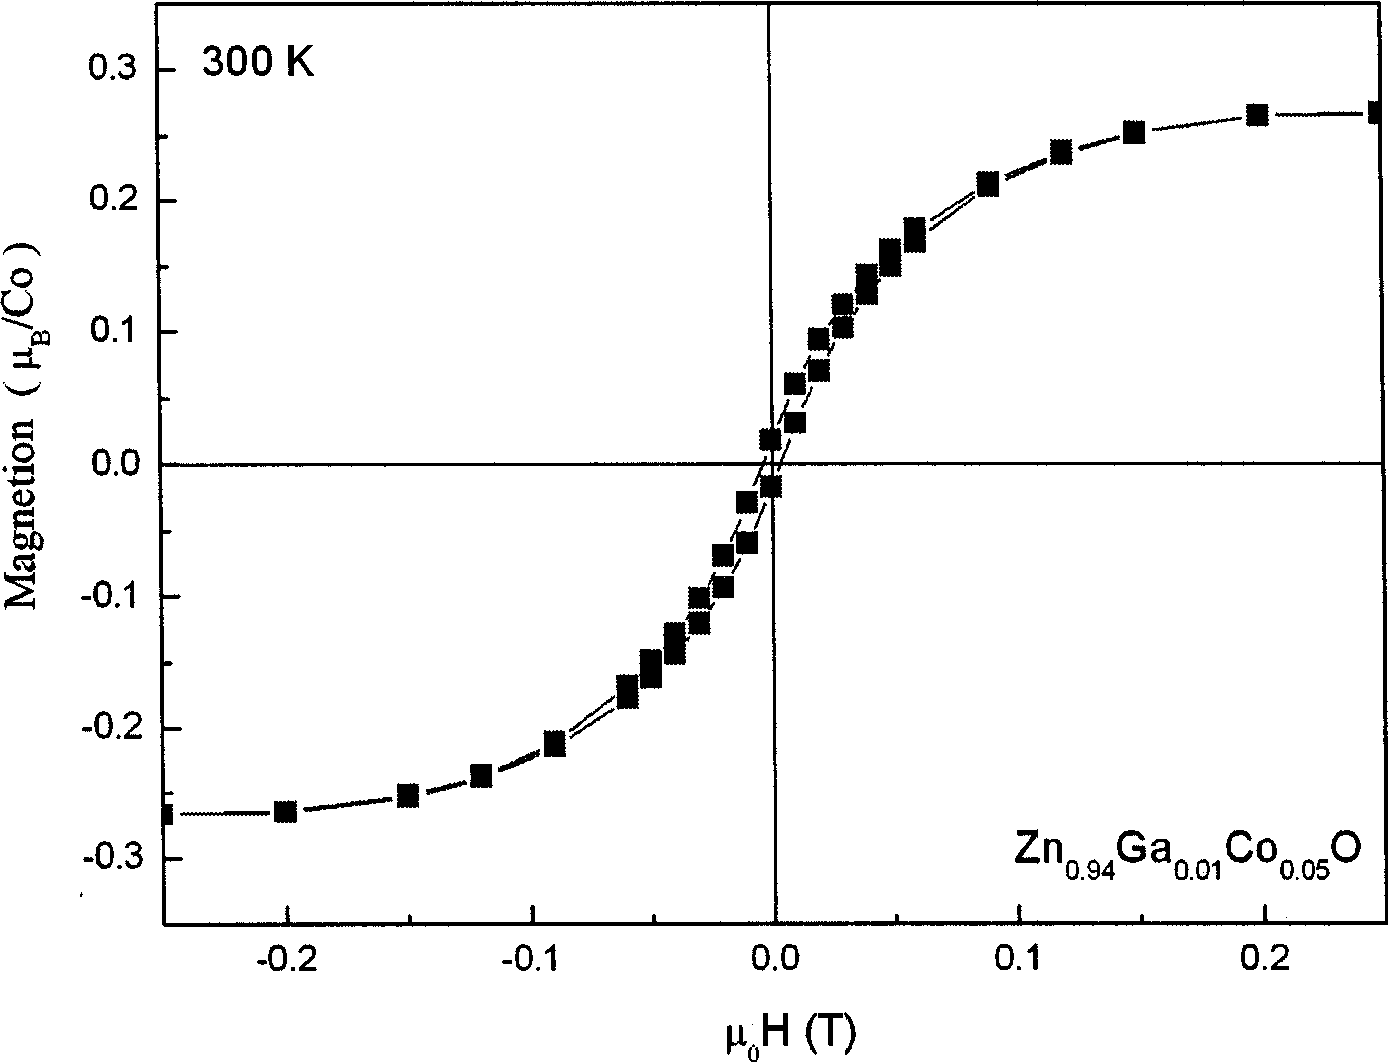 Co-Ga co-blended ZnO based diluted semi-conductor thin-film and manufacturing method thereof